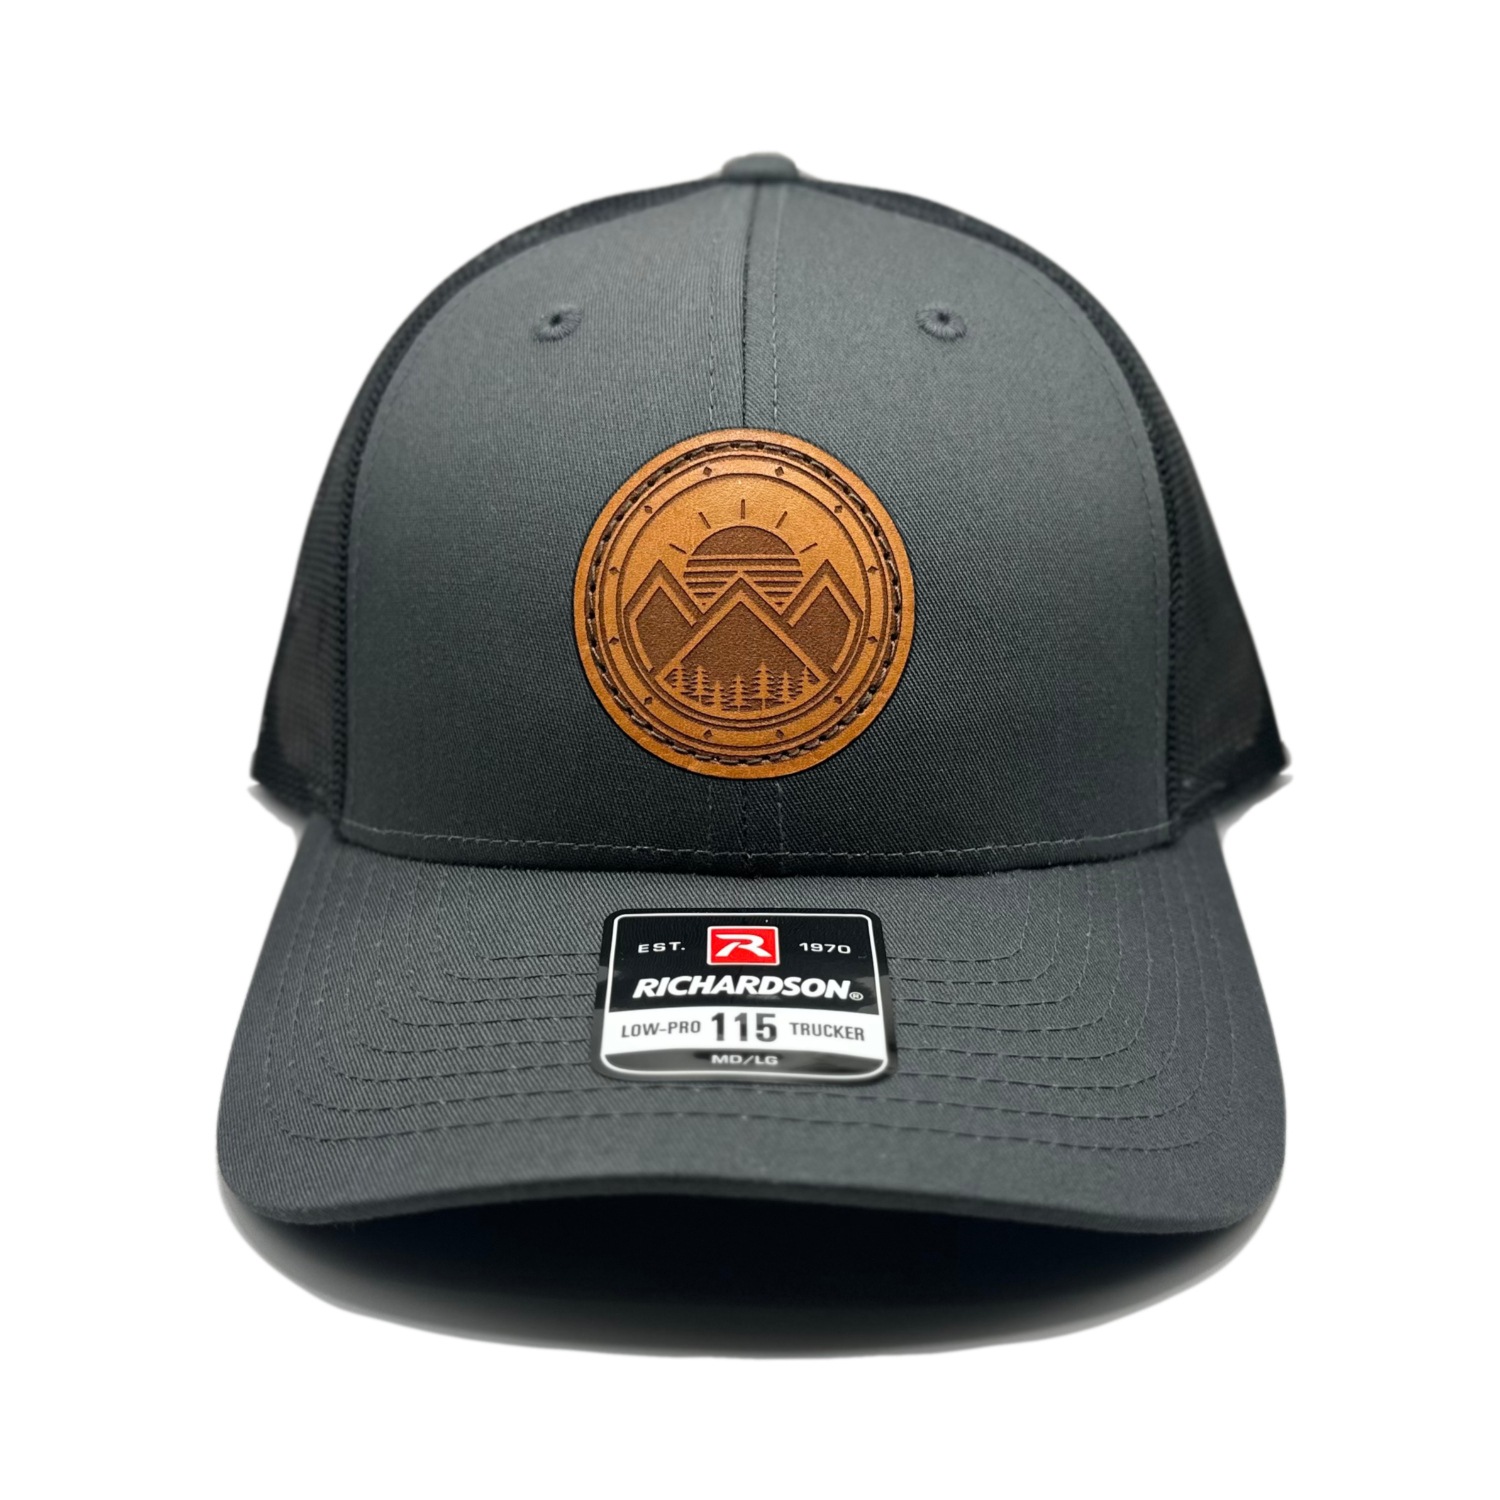 A unique leather patch hat called Modern Mountains, featuring a one-of-a-kind design with 3 mountain peaks, a sunrise, pine trees, and decorative border on a circular patch. Made in the USA, this authentic leather patch is sewn onto a SnapBack adjustable hat. Available in small and m/l sizes in the Richardson 115 style, and multiple colors in the Richardson 112. Inspired by the mountainous surroundings of our Colorado location, this hat is perfect for those who appreciate high-quality, stylish leather patch